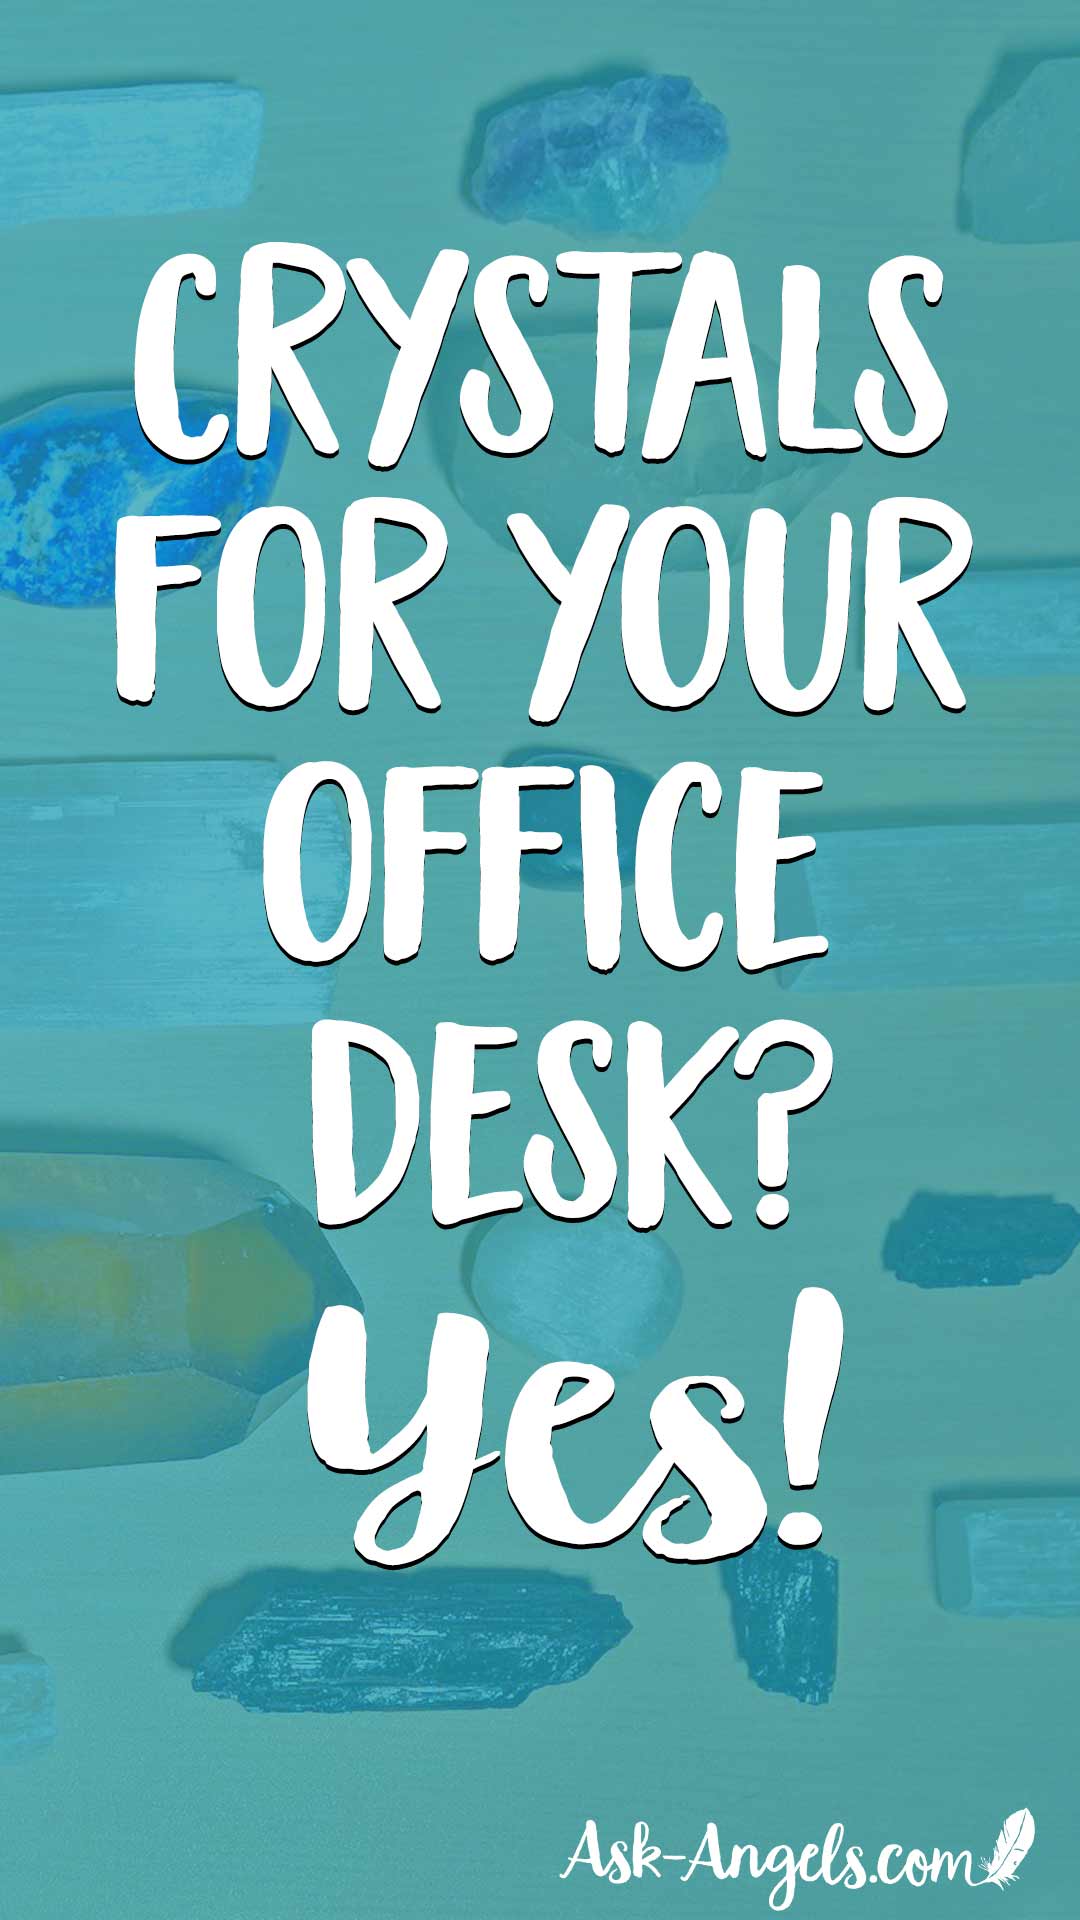 Keeping crystals on your office desk is the perfect way to help create a harmonious work atmosphere and support abundance, productiity, clarity and more! Learn my top picks here...